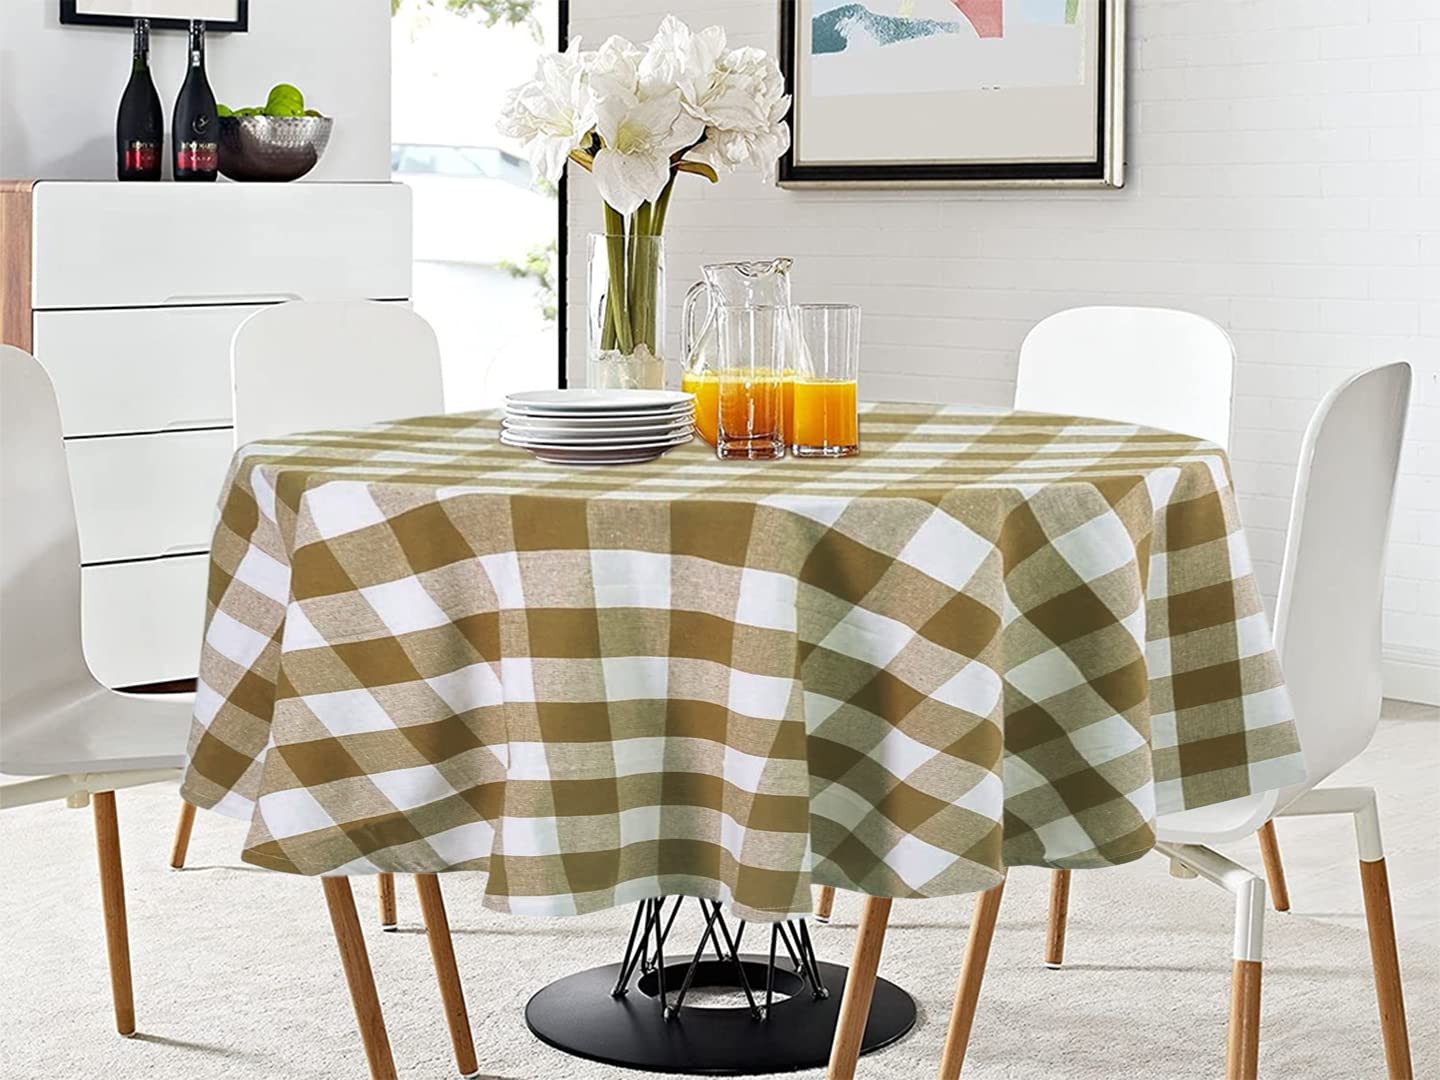 What Size Tablecloth Is Needed For A 40-Inch Round Table?